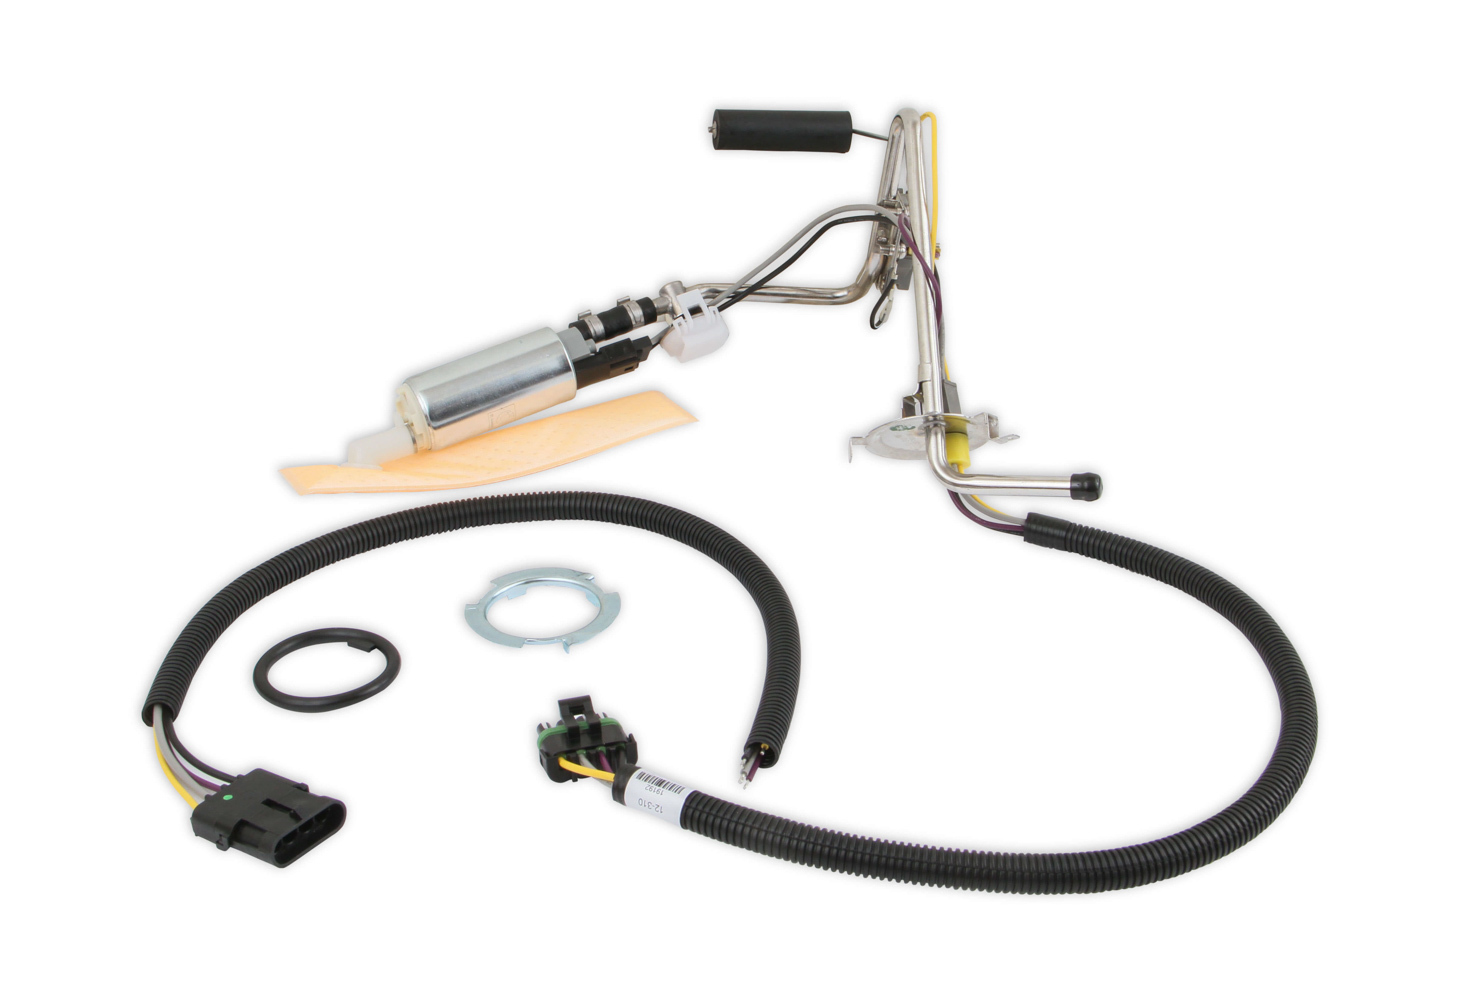 Holley 12-311 Fuel Pump, Electric, In-Tank, 255 lph, Install Kit, Gas, Chevy Corvette 1968-74, Kit